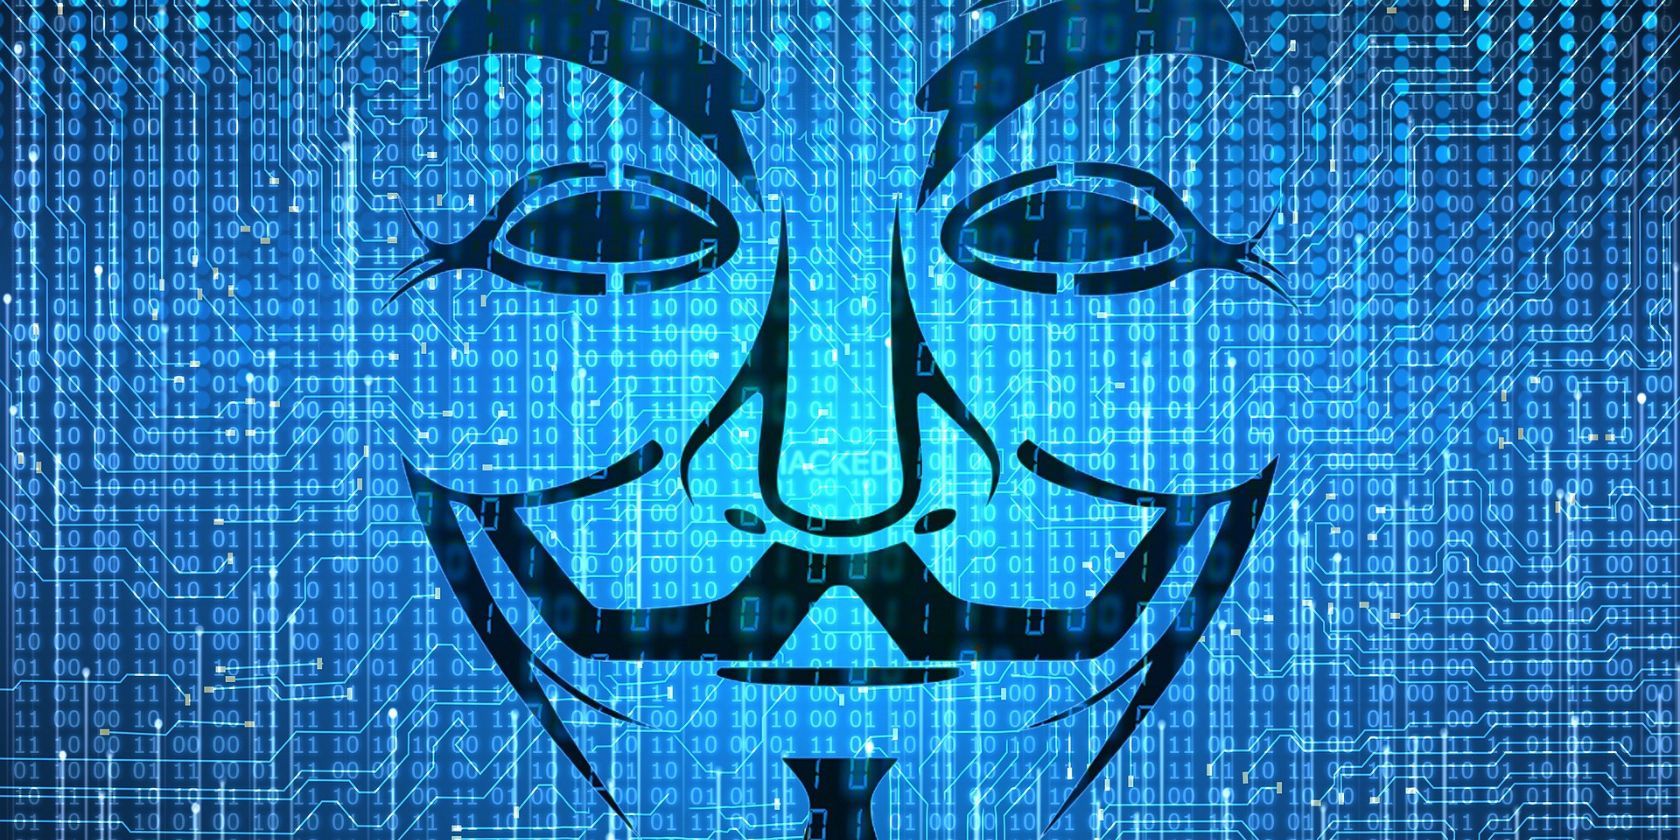 Image of a hacker's mask